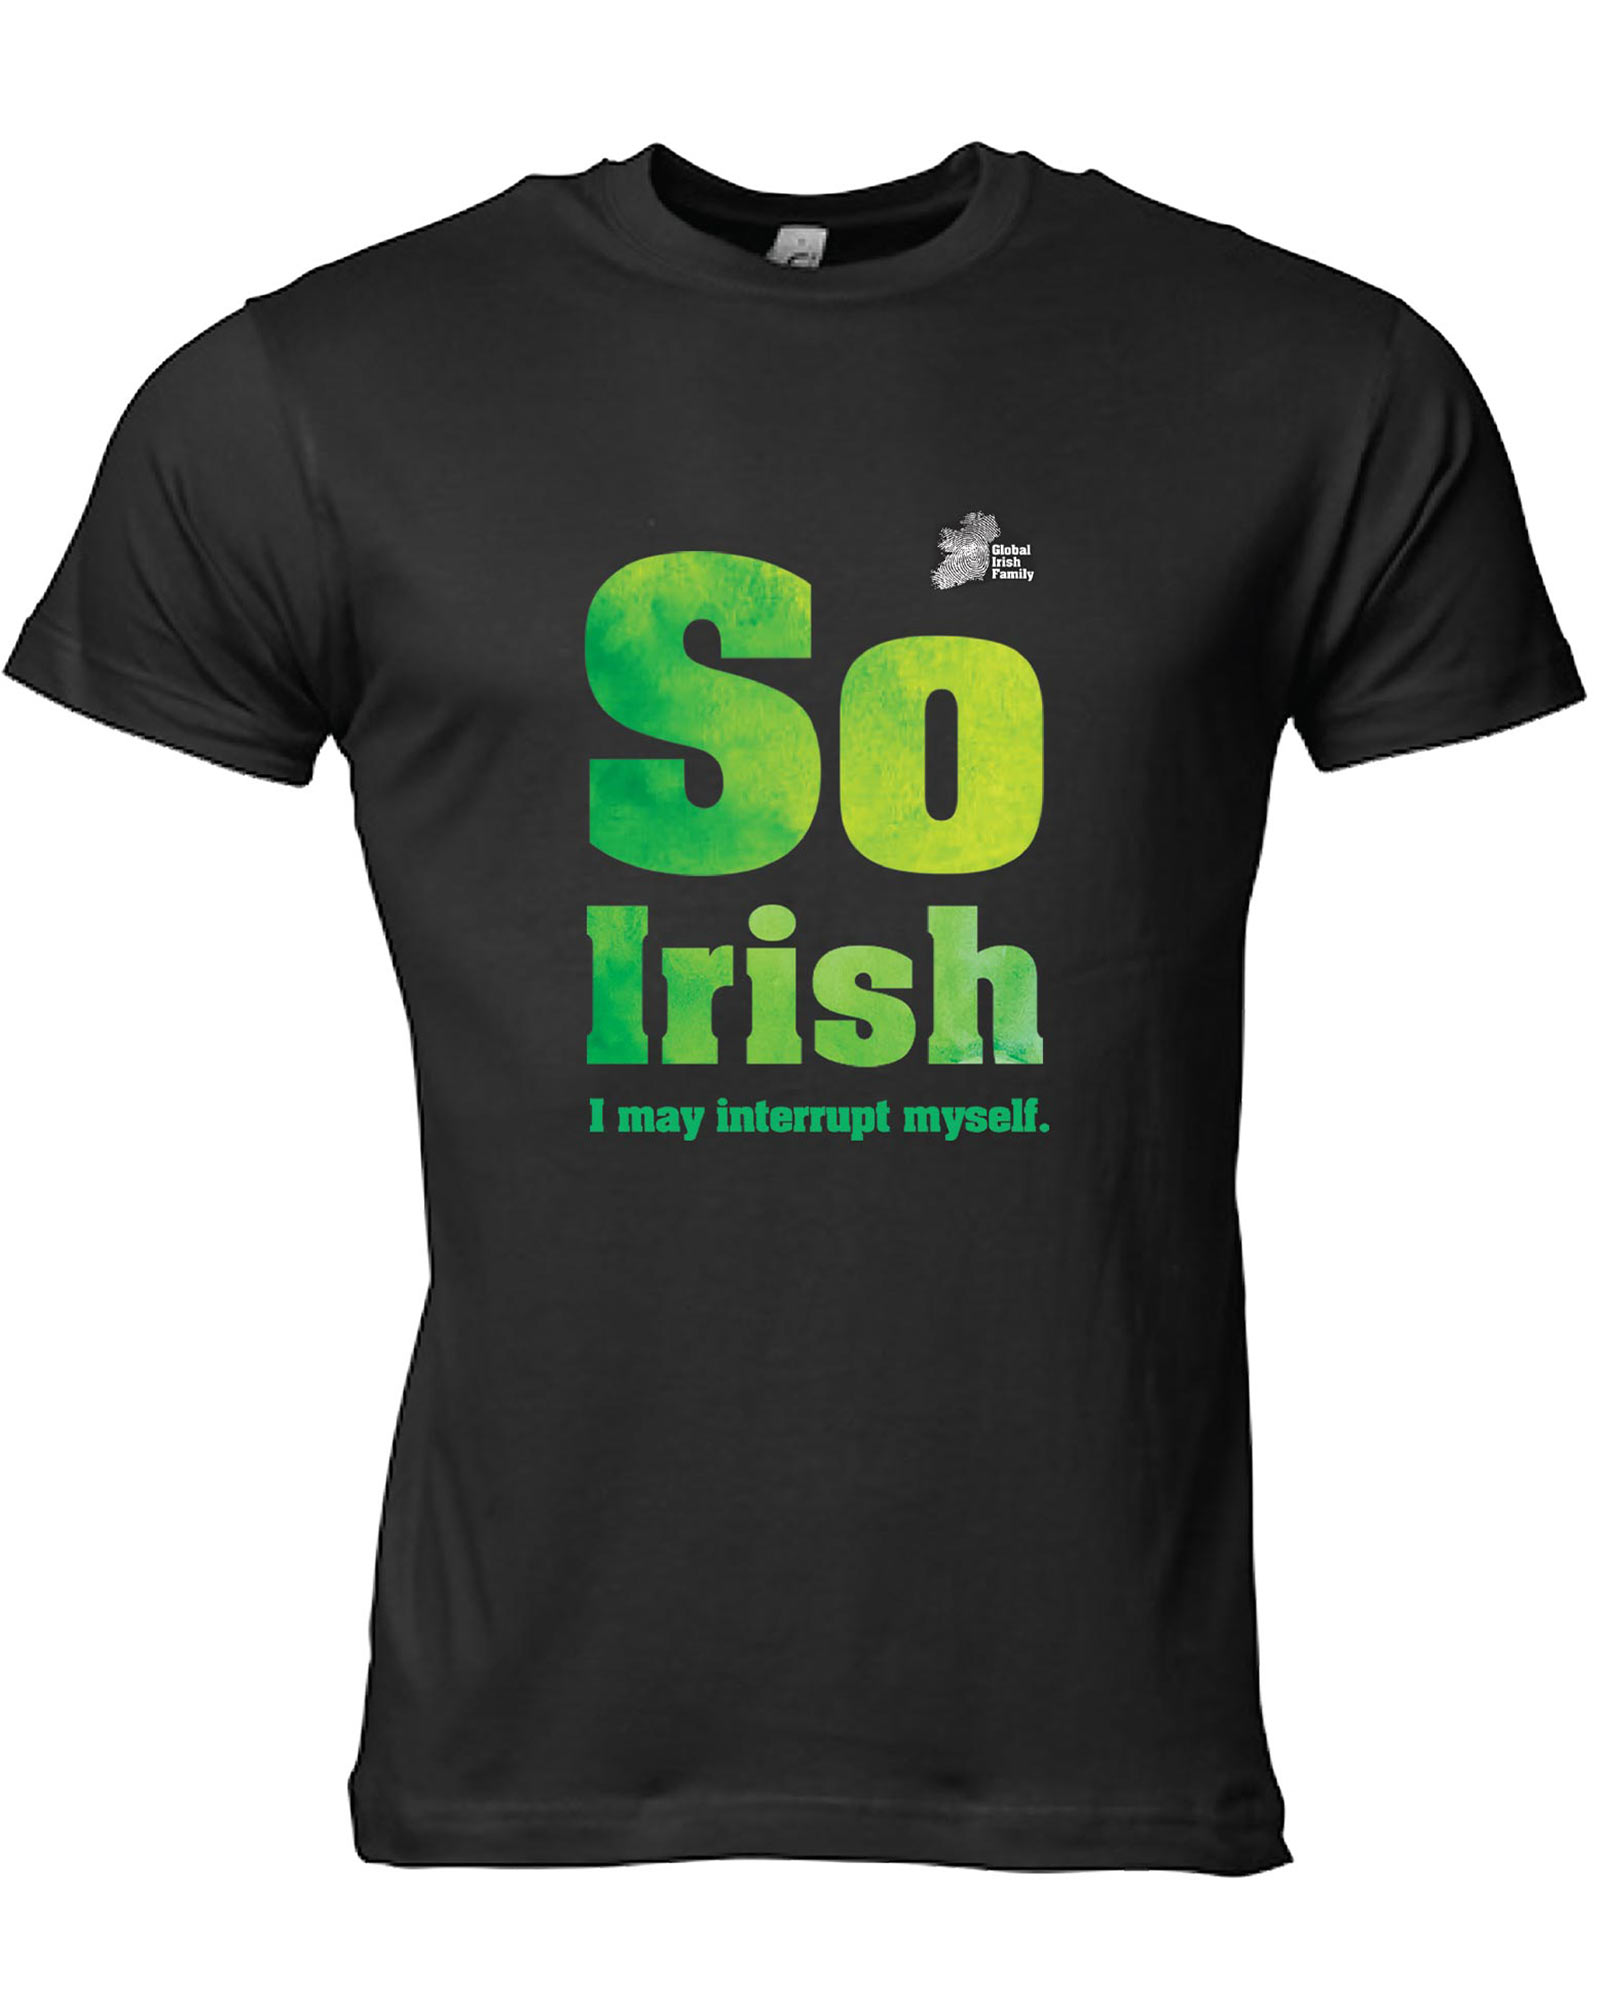 A gift for your annoyingly Irish Friend